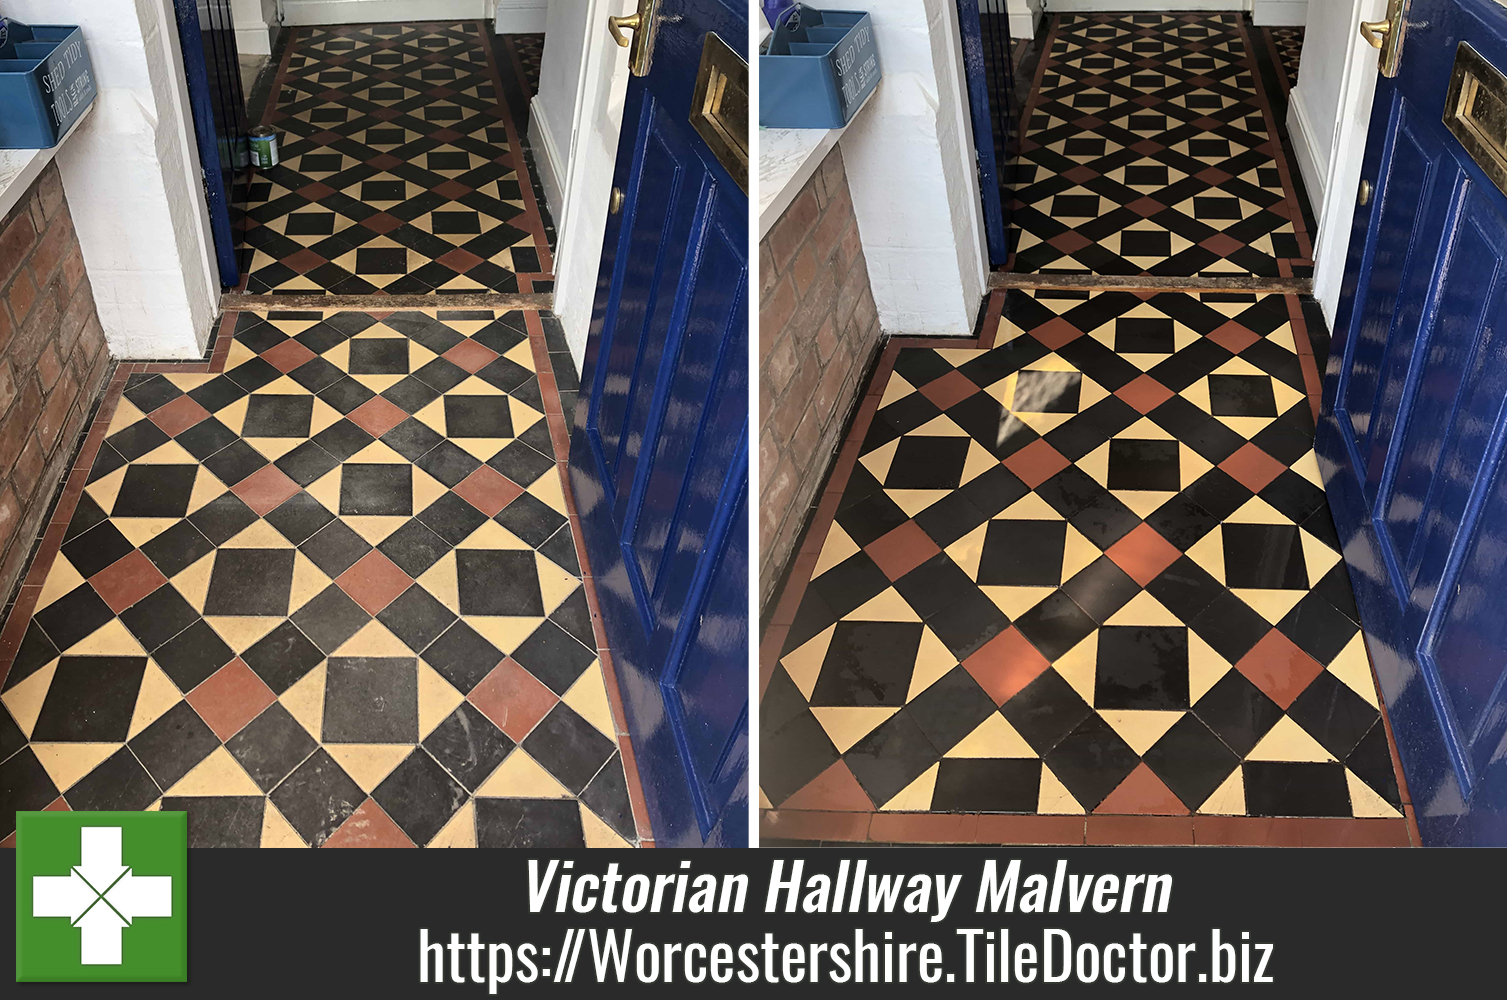 Restoring a Victorian Tiled Hallway Hidden under Carpet - Cleaning and  Maintenance Advice for Victorian Tiled Floors